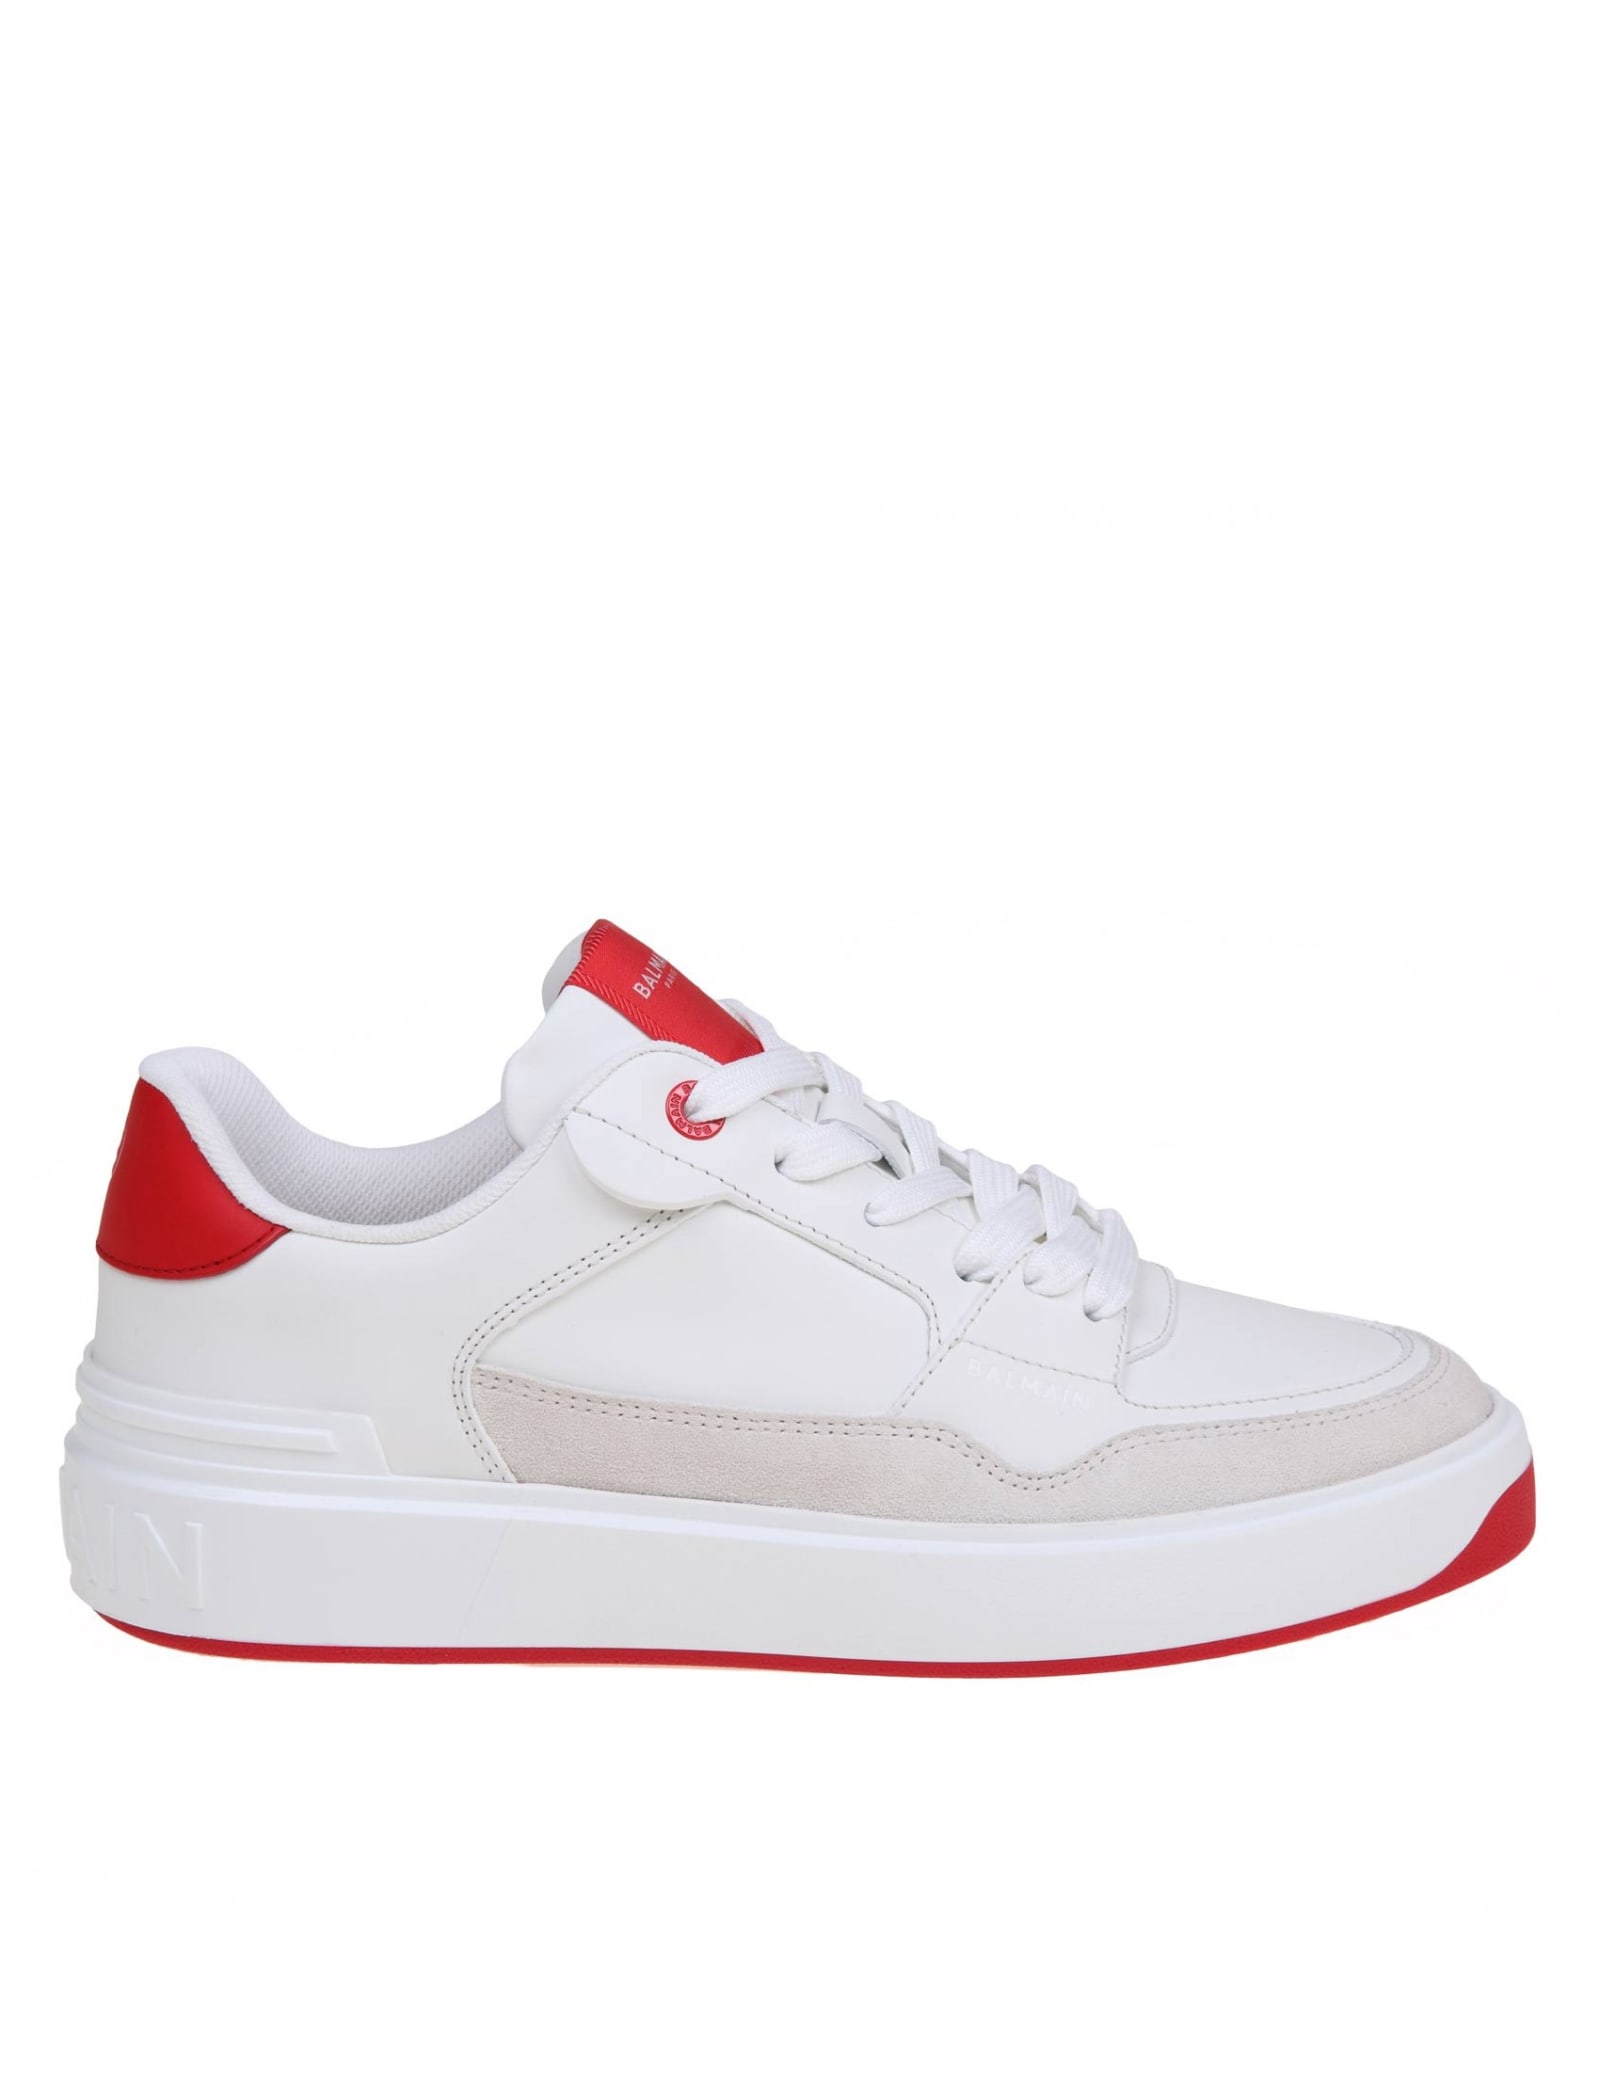 BALMAIN BALMAIN B-COURT FLIP SNEAKERS IN WHITE AND RED LEATHER